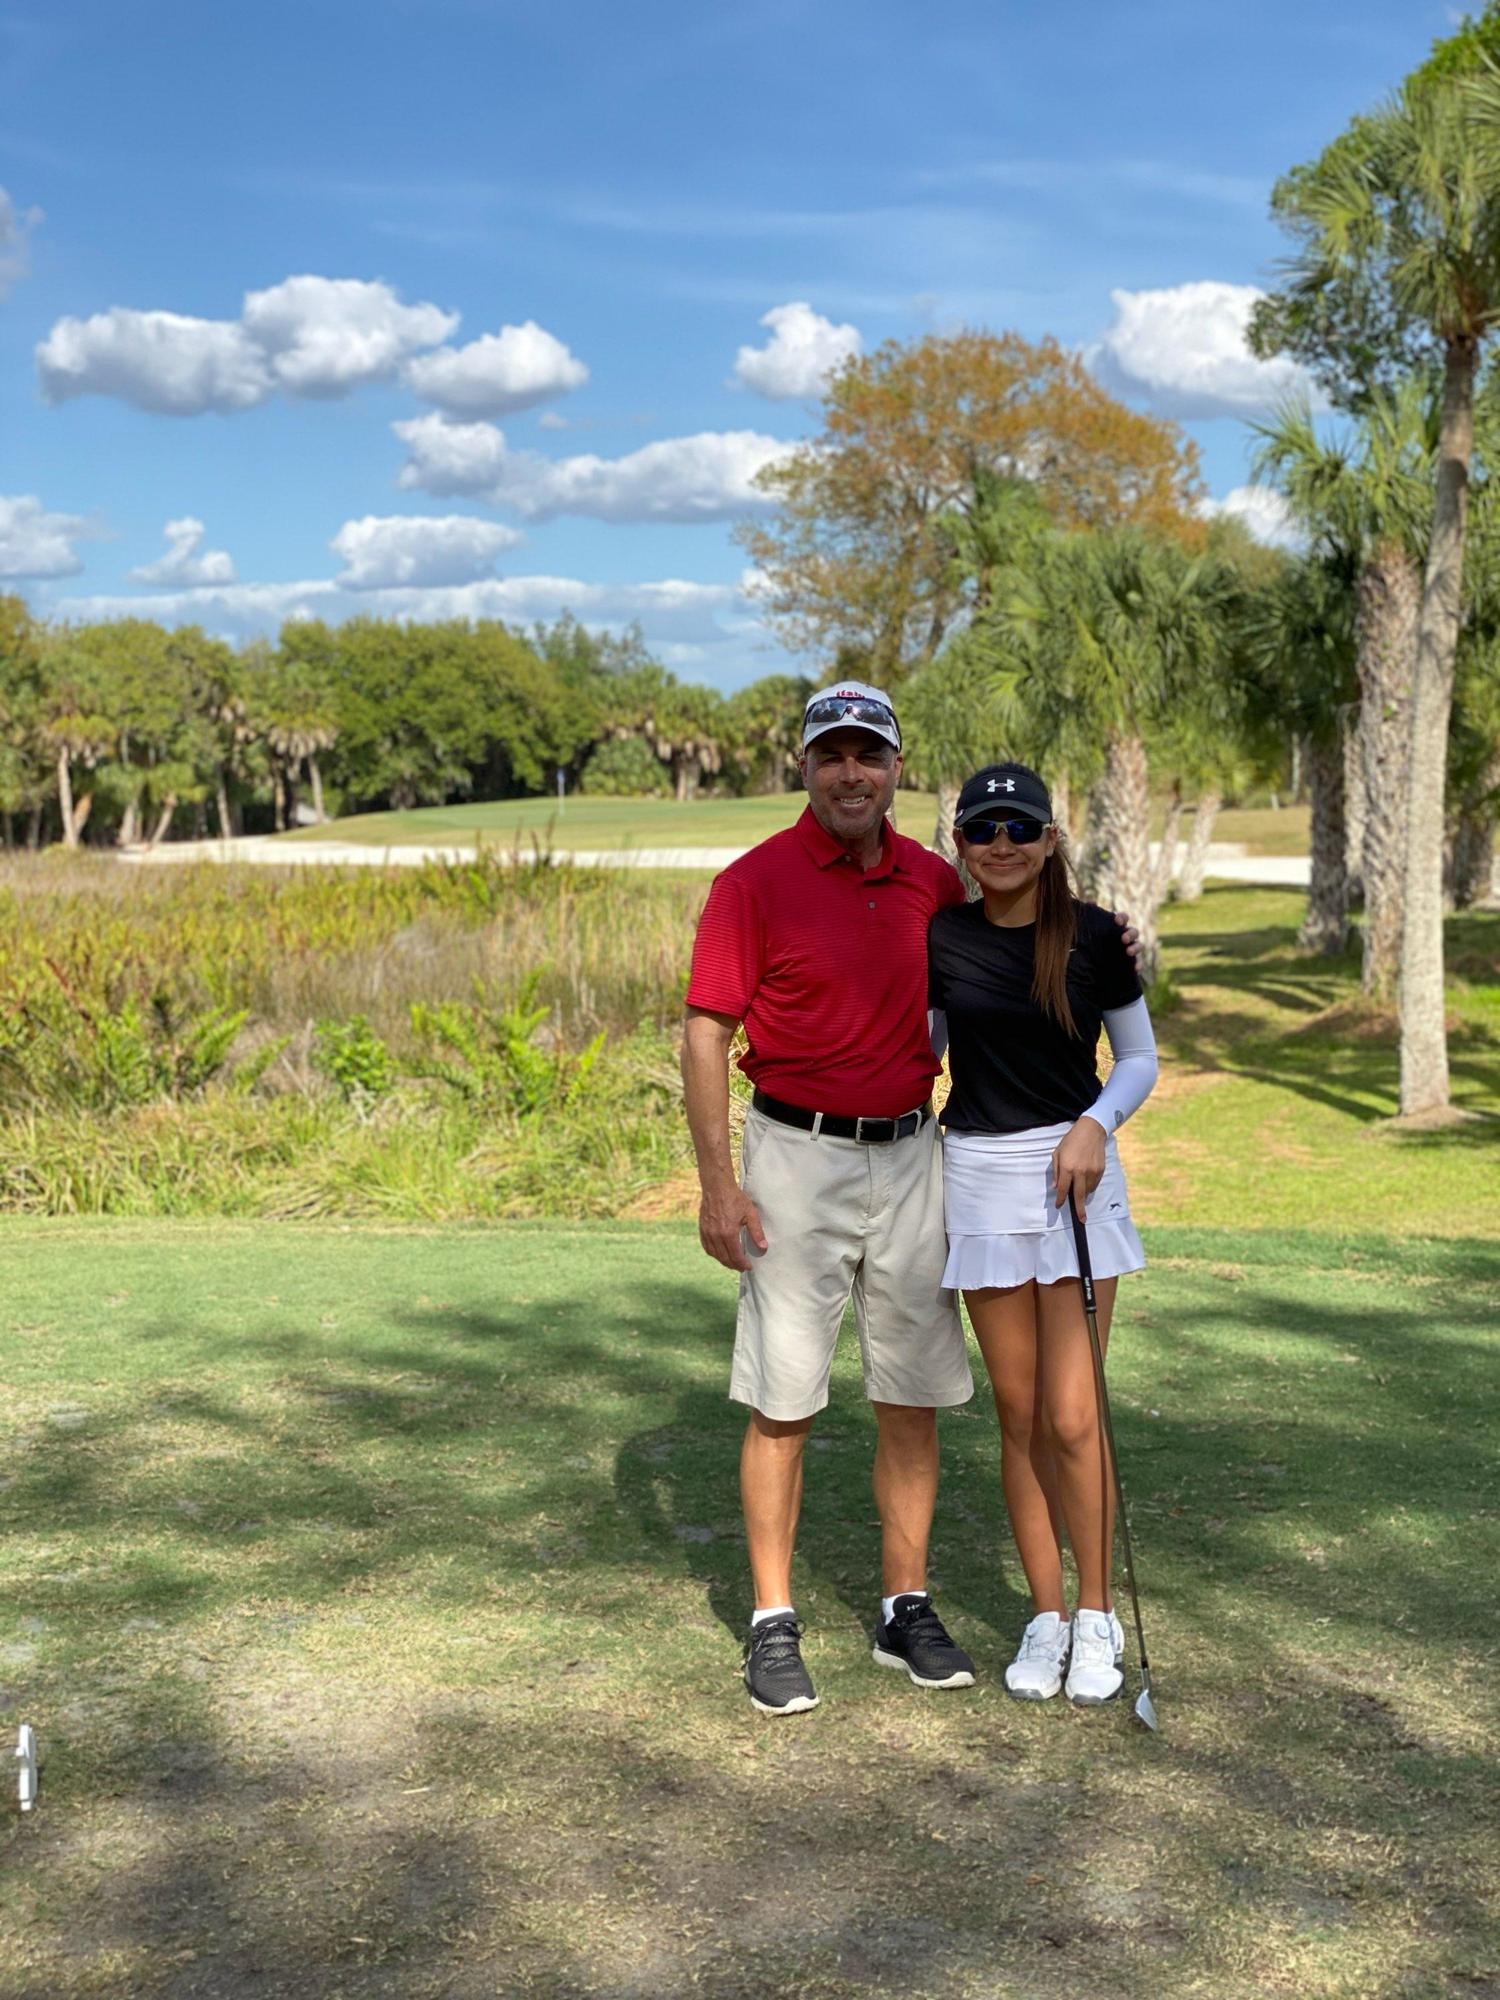 Matthew Kutt, shown playing with his daughter Alana Kutt, says golf is 